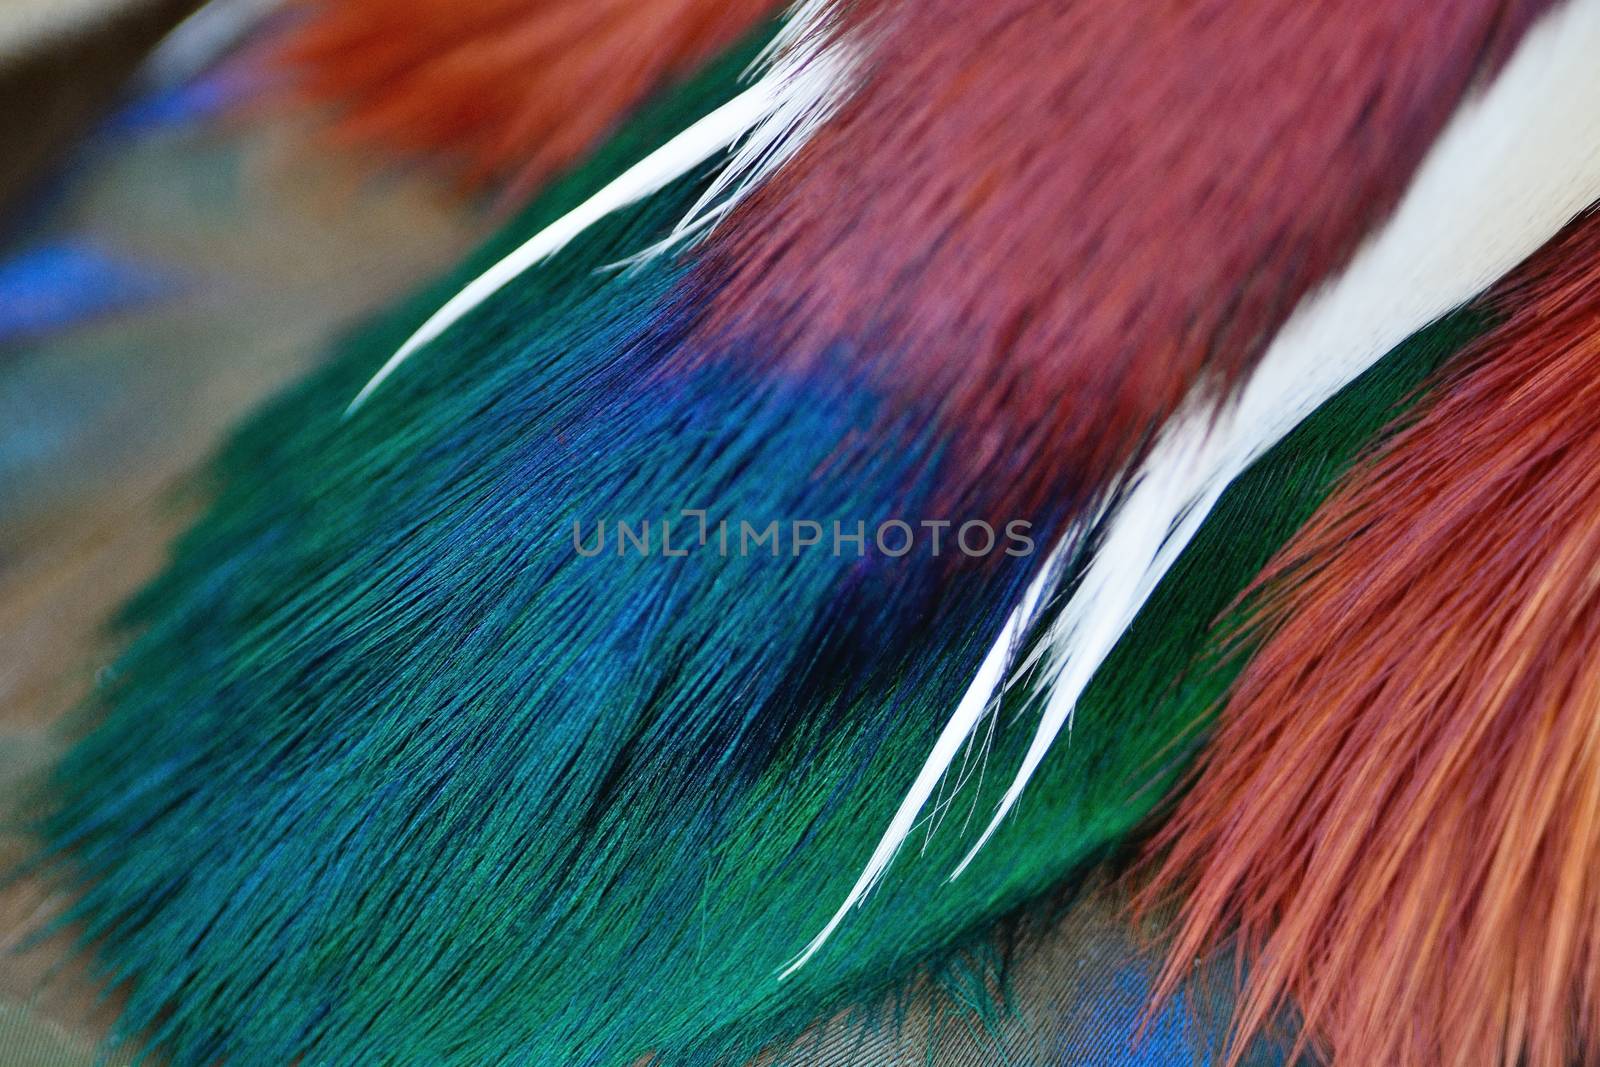 Colorful Mandarin Duck feathers, texture abstract background